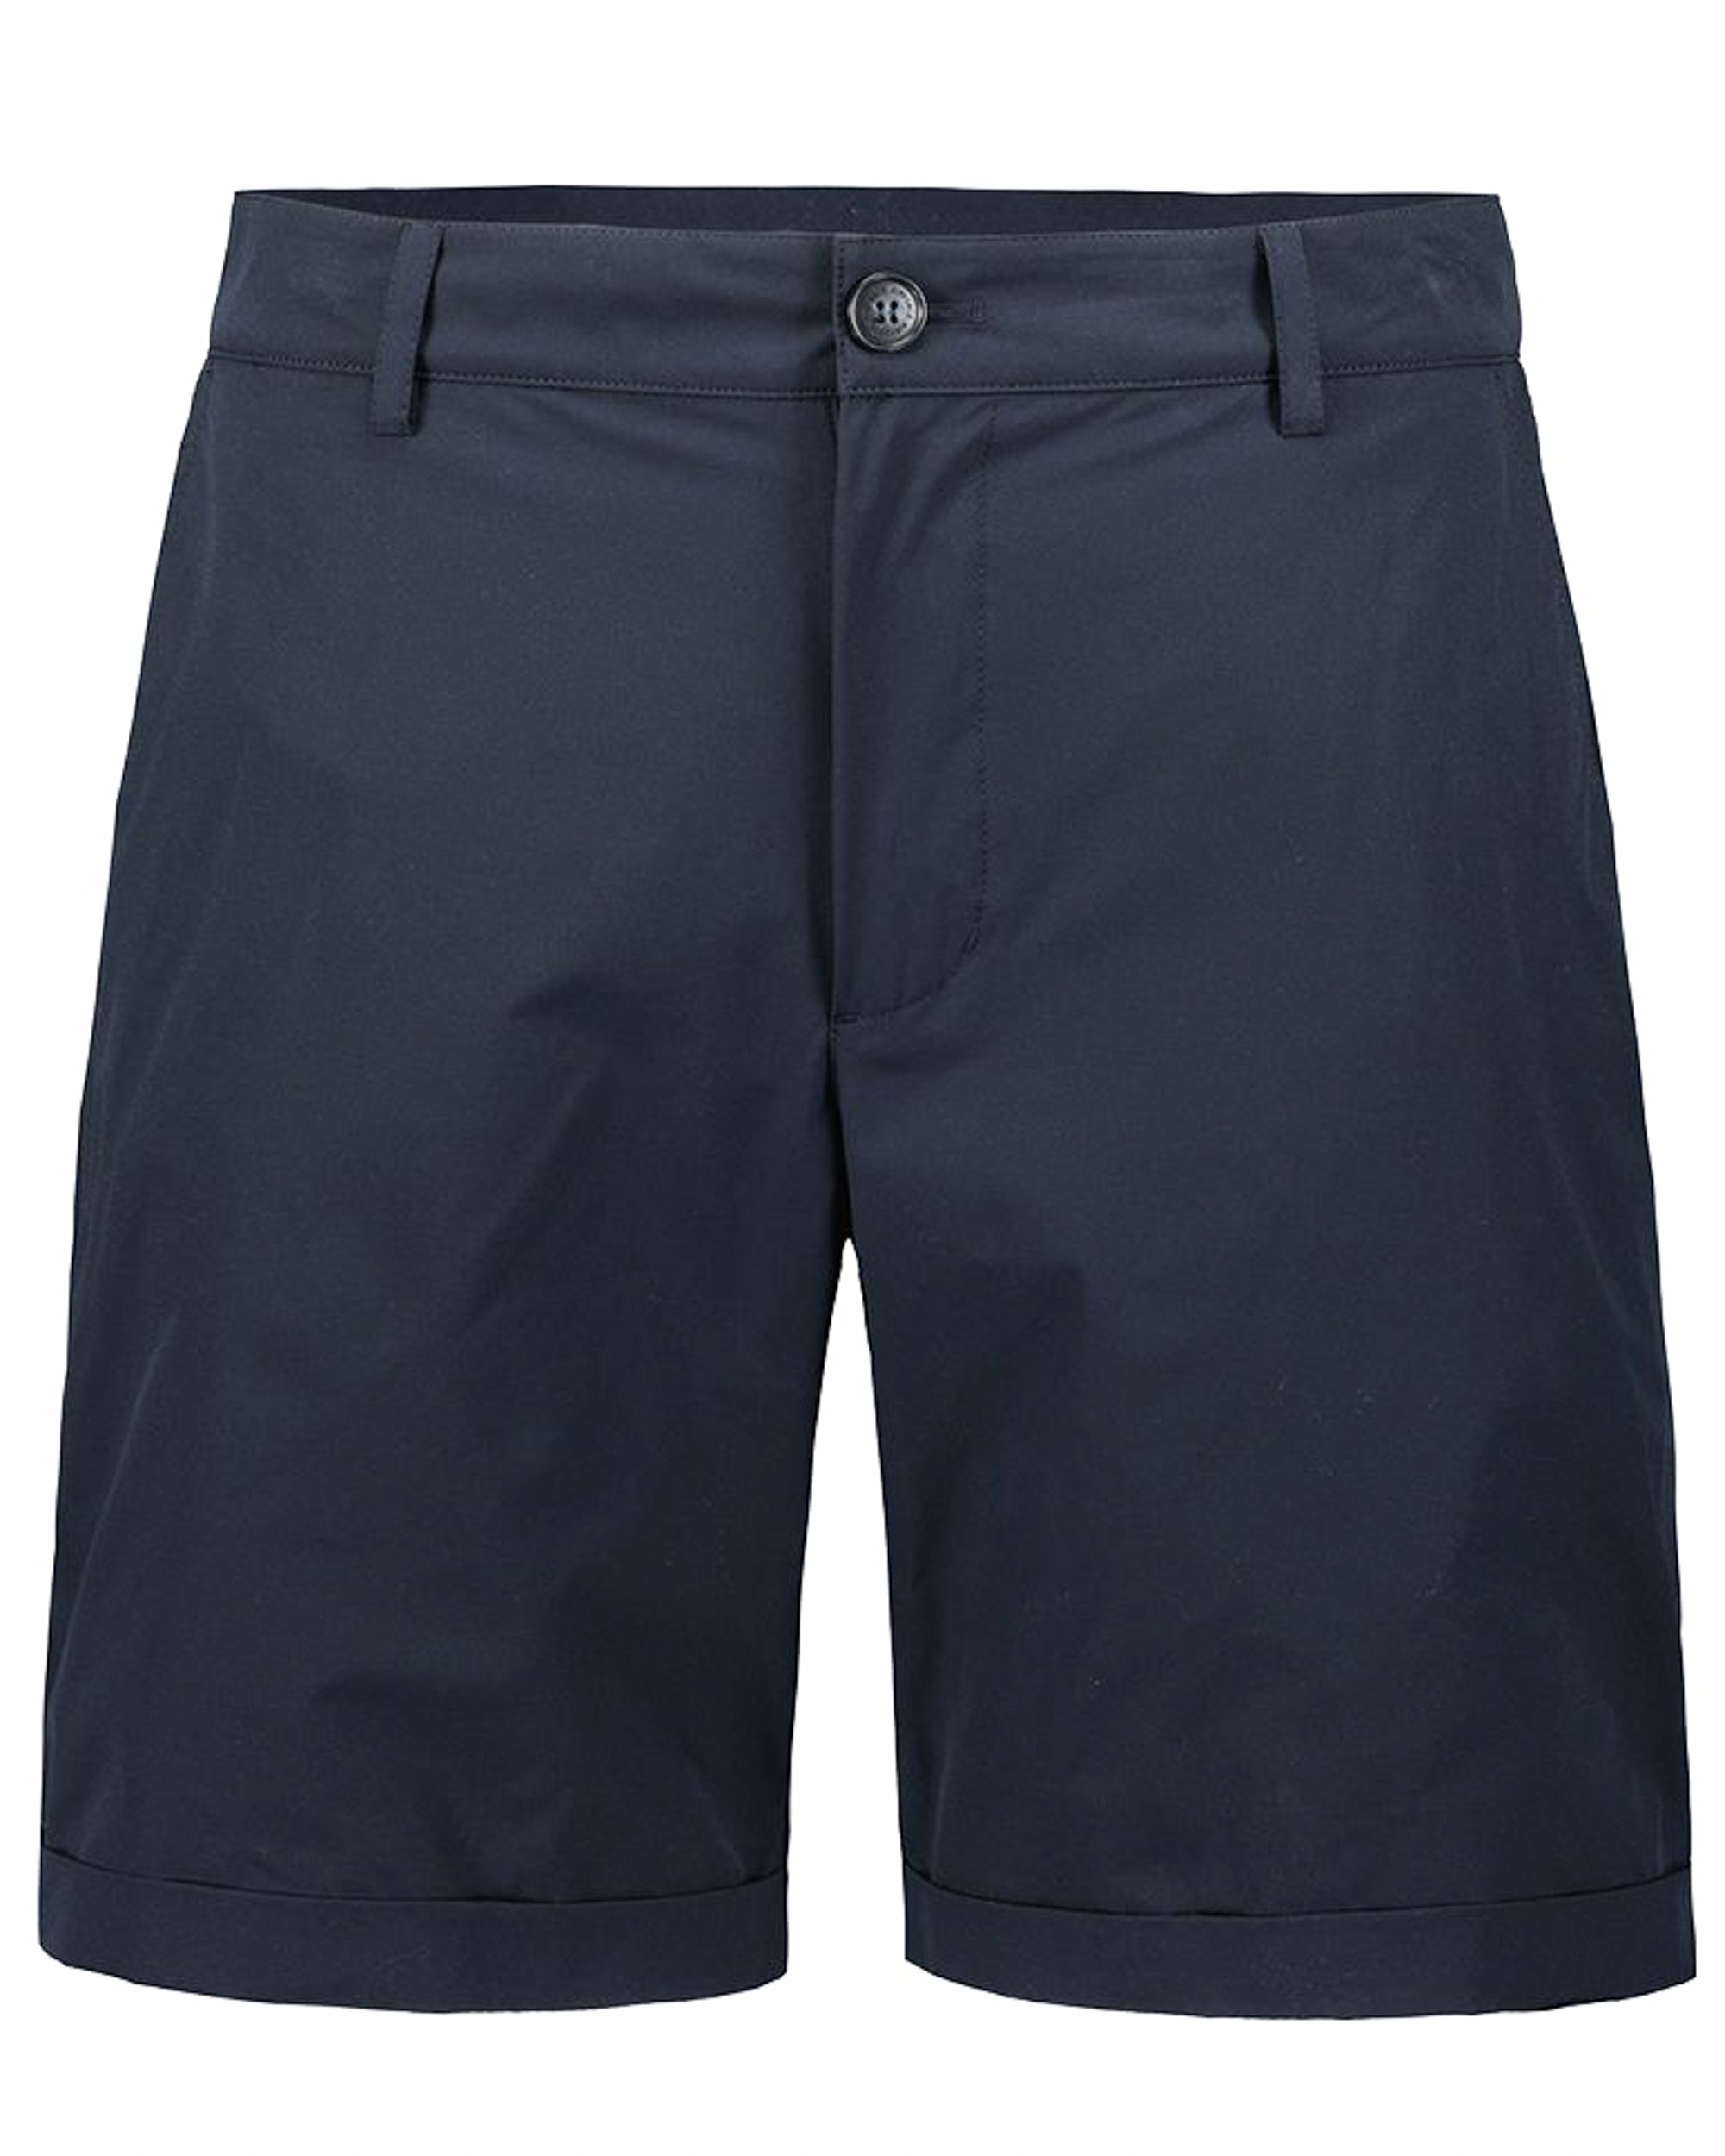 Airforce Short Donker blauw 092938-001-L